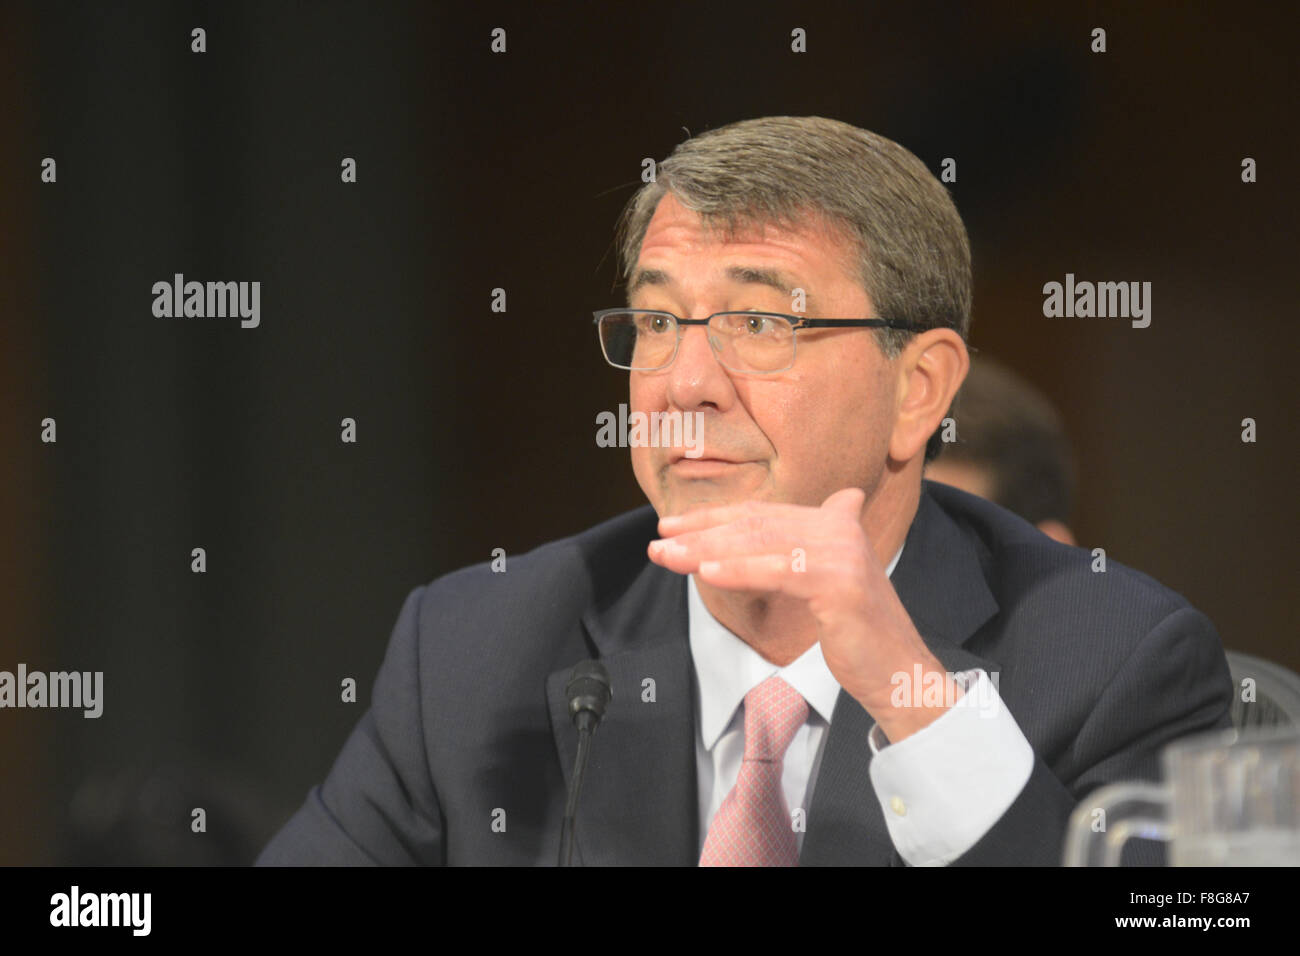 (151209)-- WASHINGTON D.C., Dec. 9, 2015 (Xinhua) -- U.S. Defense Secretary Ash Carter testifies before the Sneate Armed Services Committee on the U.S. strategy to counter the Islamic State of Iraq and the Levant and the U.S. policy toward Iraq and Syria, in Washington, DC, the United States, Dec. 9, 2015. U.S. Defense Secretary Ash Carter said on Wednesday the Pentagon was prepared to assist the Iraqi government with more personnel and attack helicopters to retake the key Iraqi city of Ramadi from the Islamic State (IS). (Xinhua/Zheng Qihang) Stock Photo